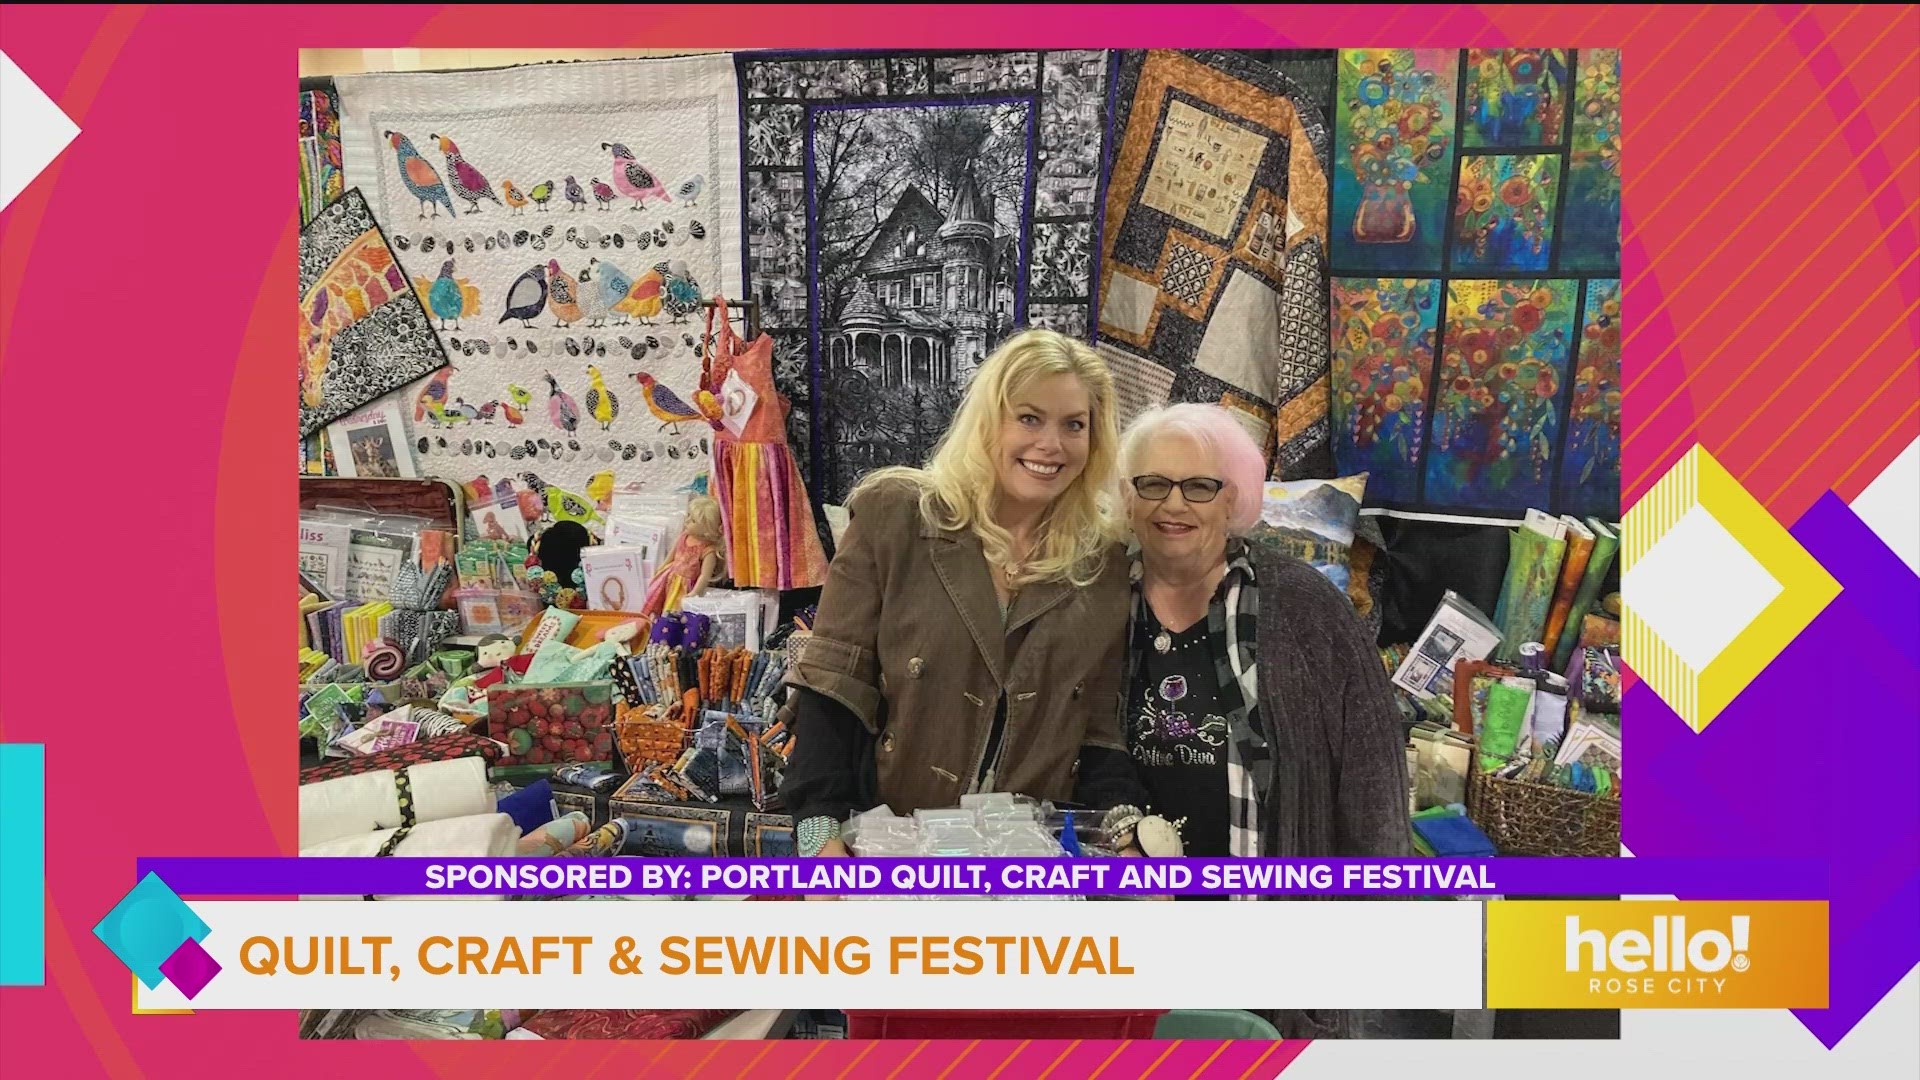 This segment is sponsored by Portland Quilt, Craft and Sewing Festival